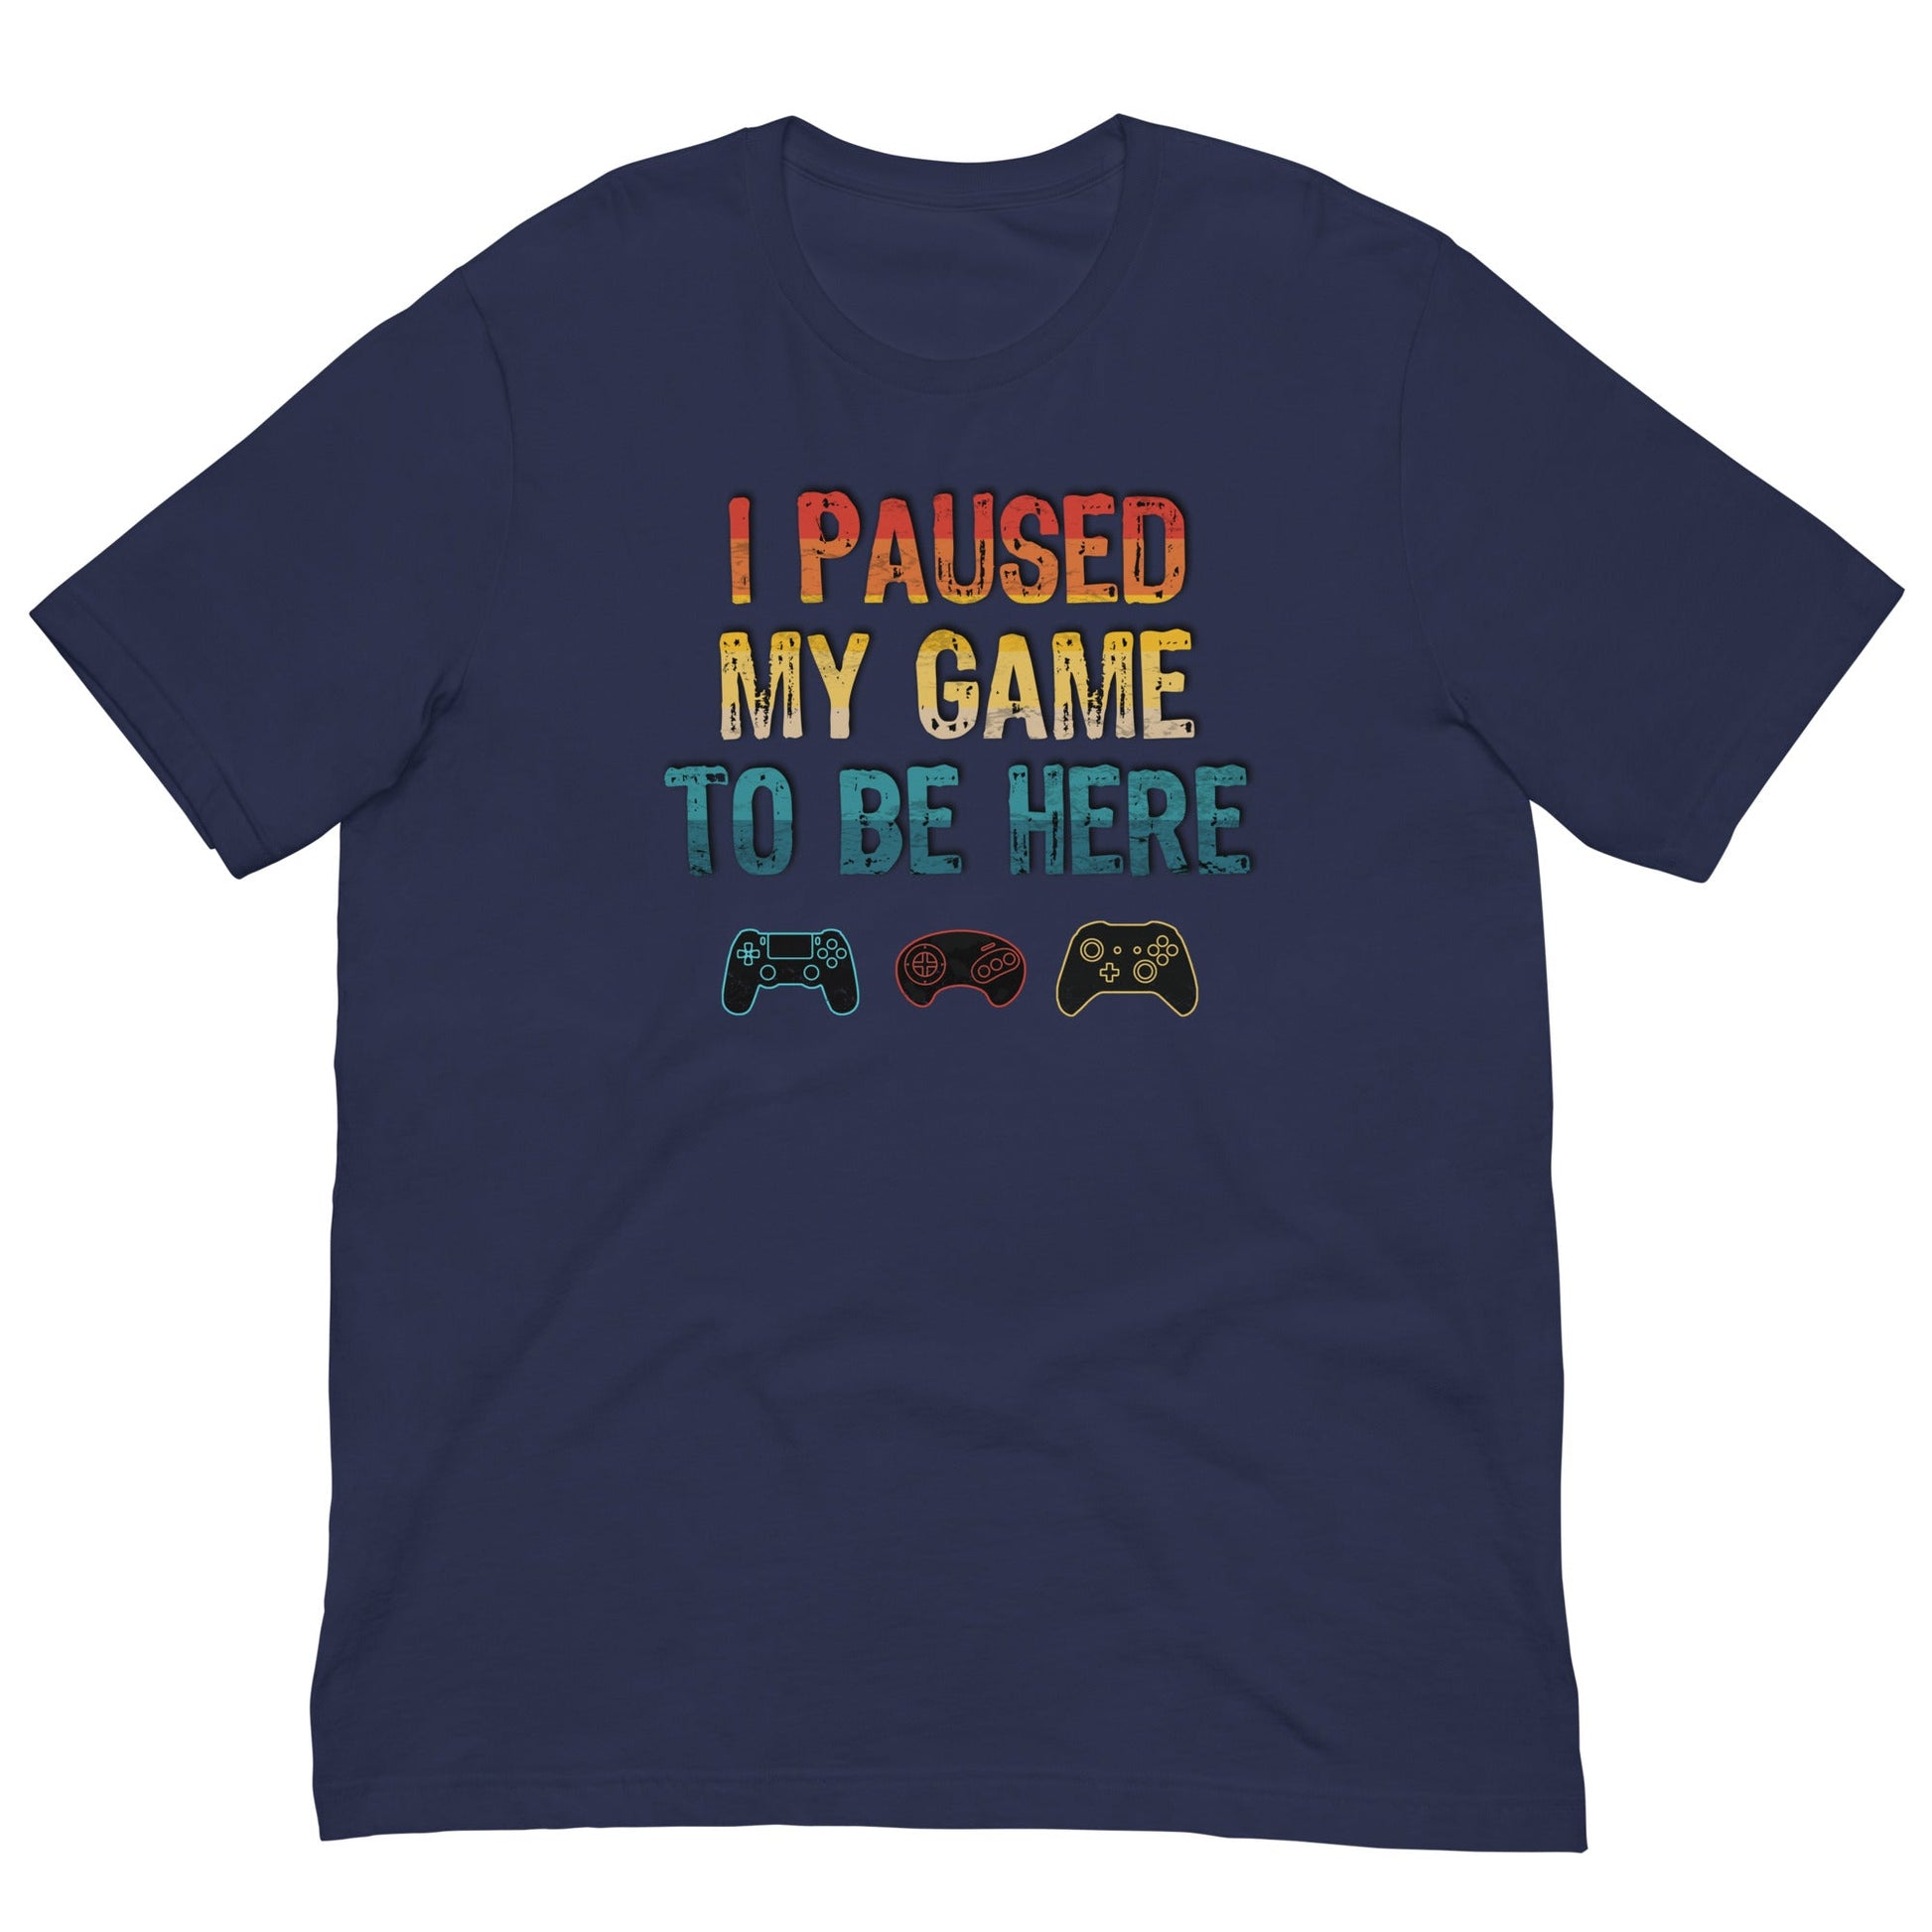 Scar Design T shirt Navy / XS I paused my game to be here T-shirt